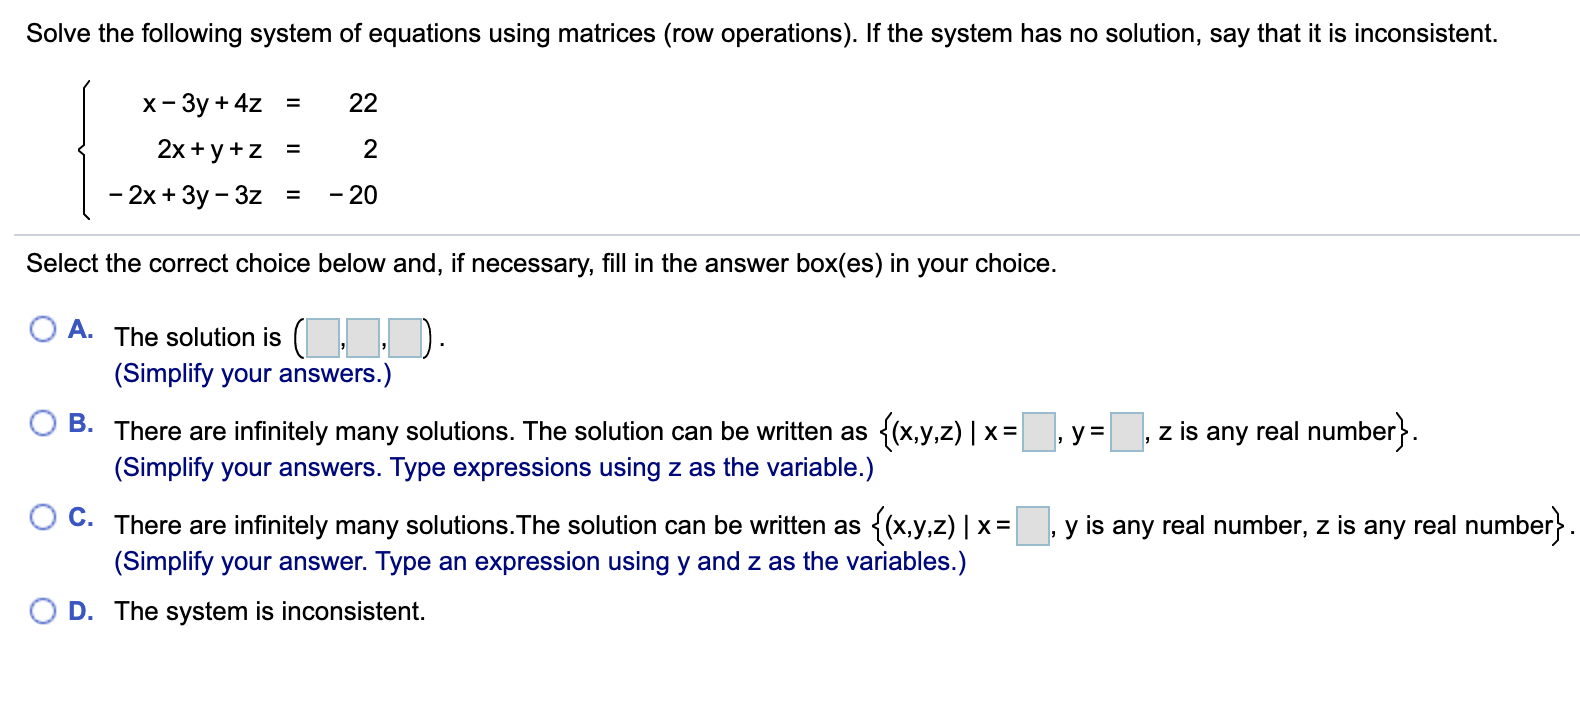 Solve the following system of equations using matrices (row operations). If the system has no solution, say that it is inconsistent.
x- 3y + 4z
22
=
2x + y +z
2
=
- 20
- 2х + Зу - 3z
Select the correct choice below and, if necessary, fill in the answer box(es) in your choice.
O A. The solution is (,
).
(Simplify your answers.)
real number}.
B.
There are infinitely many solutions. The solution can be written as {(x,y,z) | x =
(Simplify your answers. Type expressions using z as the variable.)
z is
y=
any
C. There are infinitely many solutions. The solution can be written as {(x,y,z) | x=
(Simplify your answer. Type an expression using y and z as the variables.)
y is any real number, z is any real number}.
D. The system is inconsistent.
